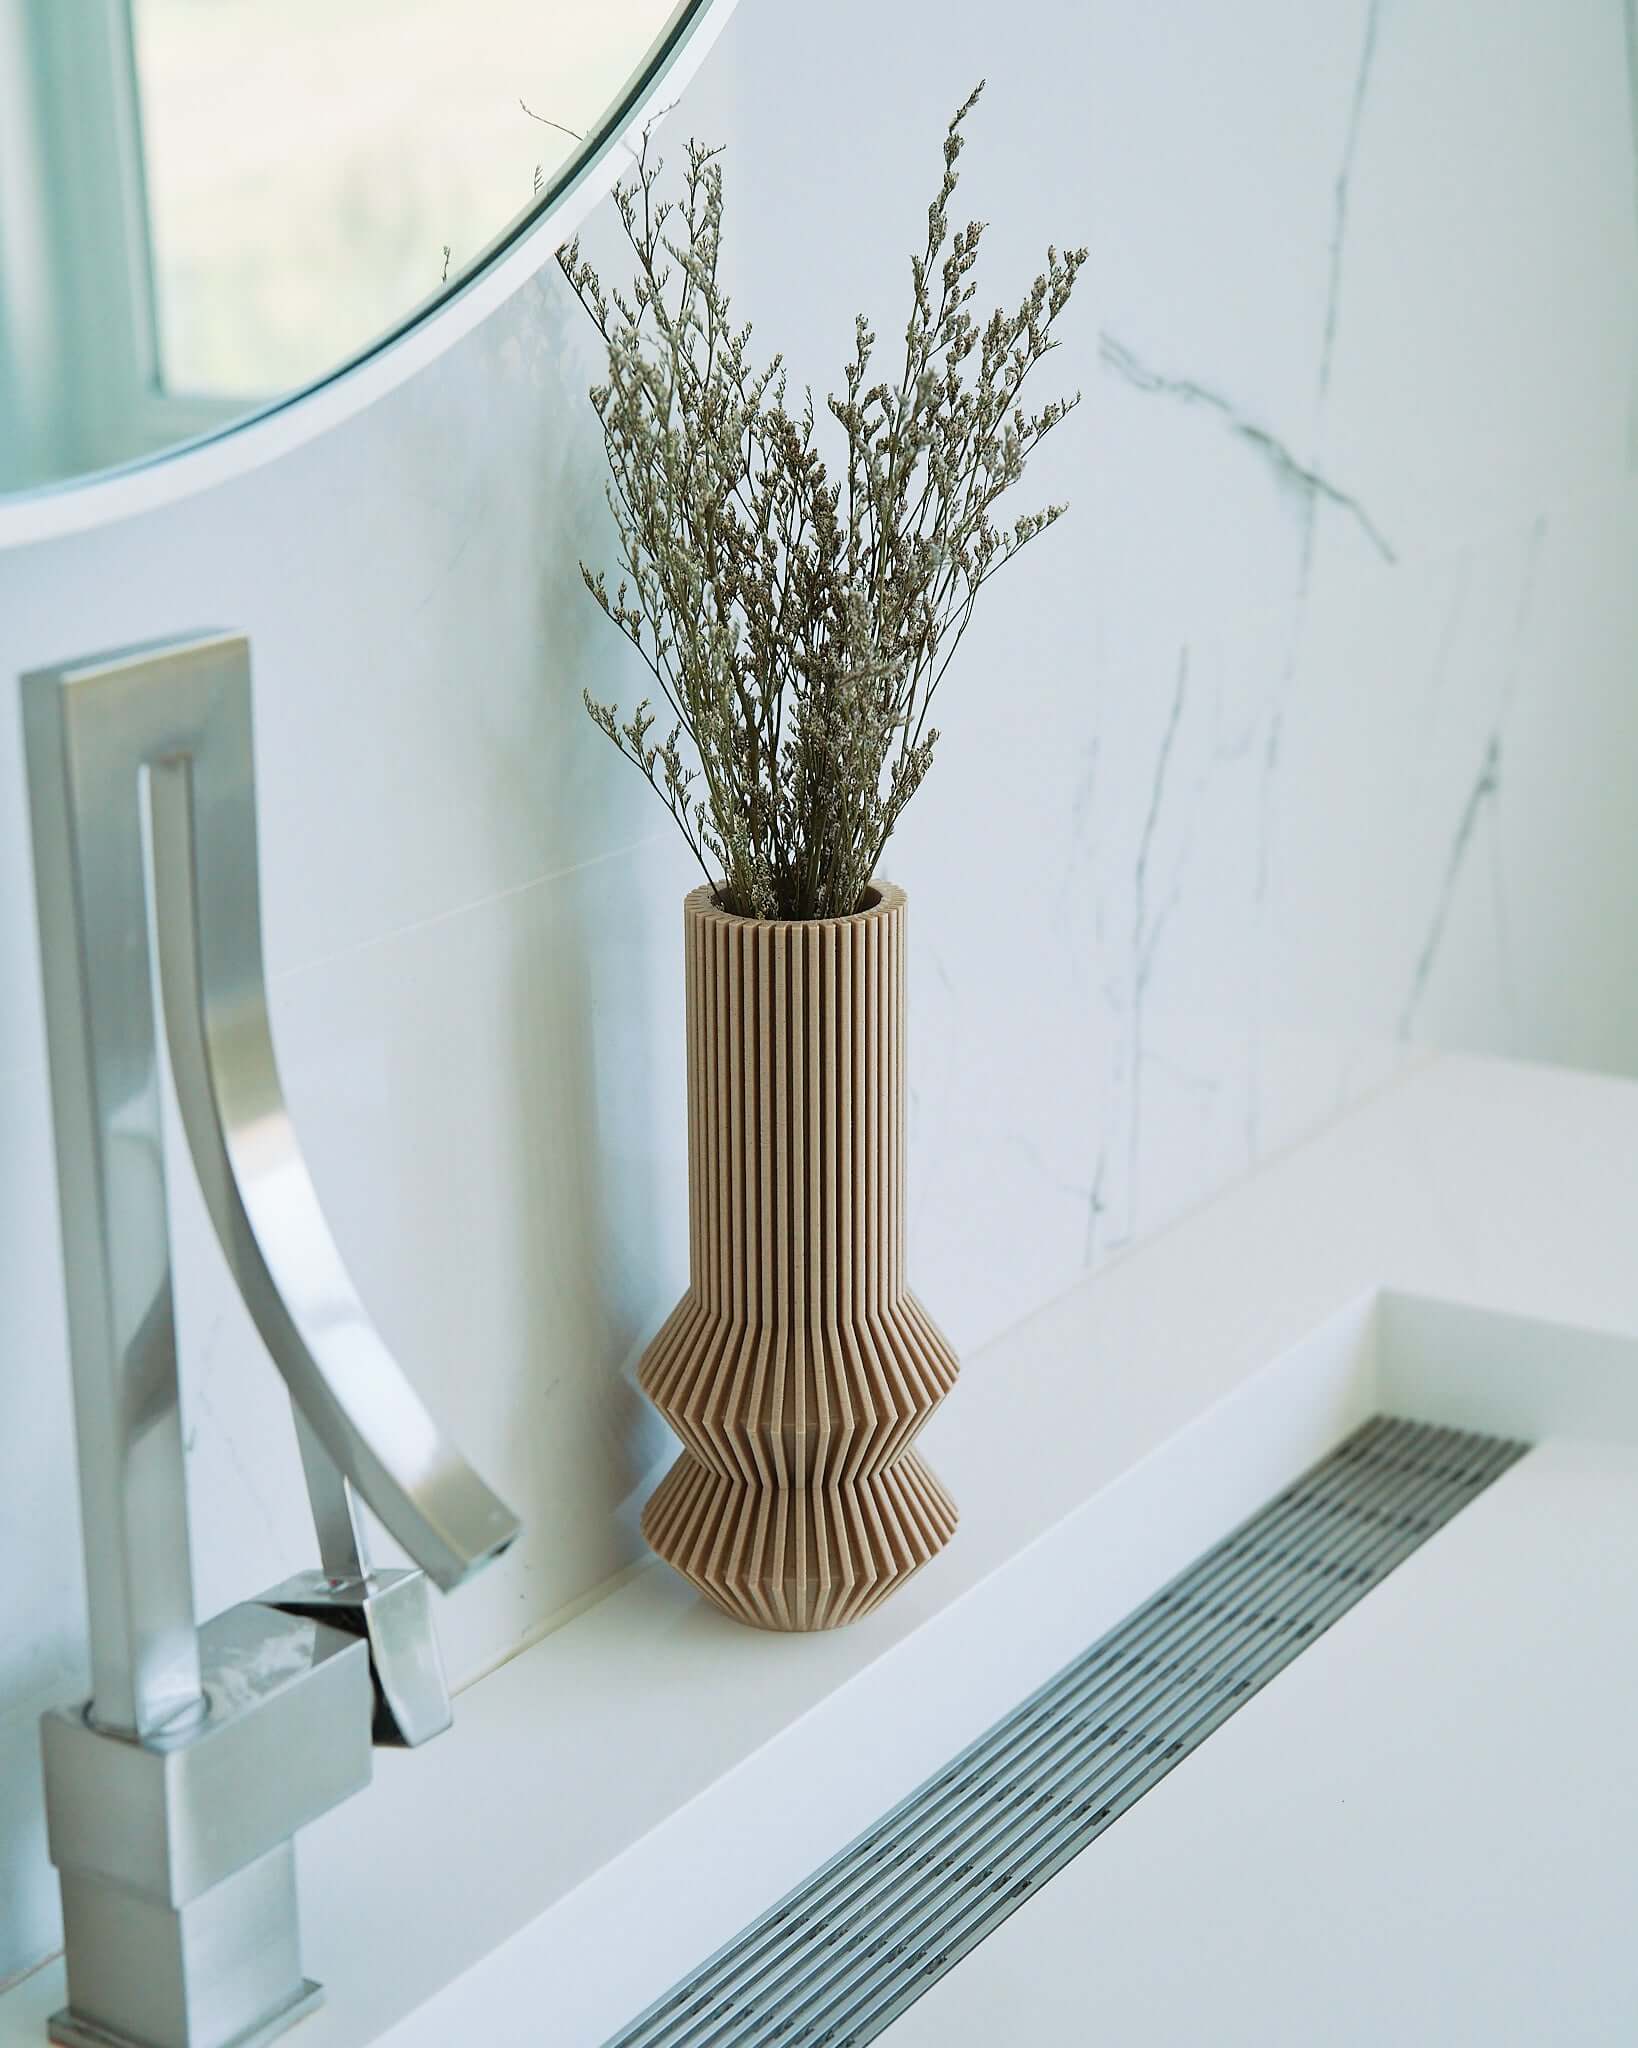 A small vase from Woodland Pulse. This is a cream color vase from the Woodland Pulse boho vases collection.